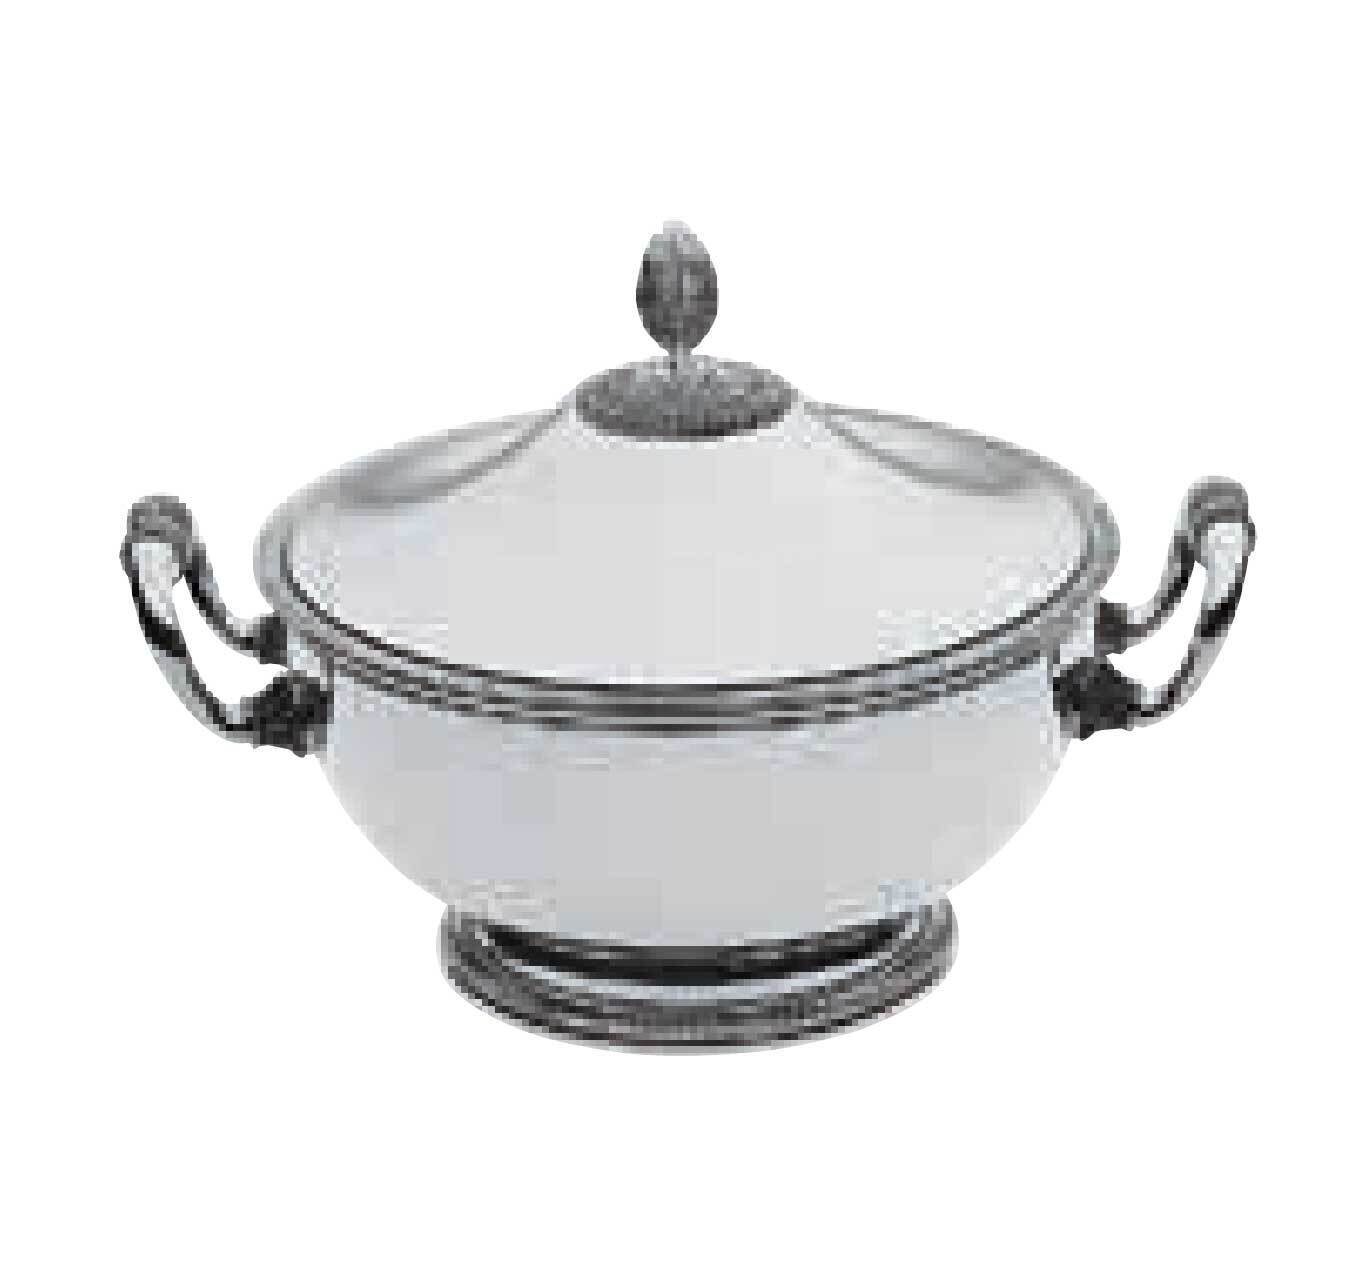 Ercuis Empire Soup Tureen 8.625 Inch Silver Plated F500200-22